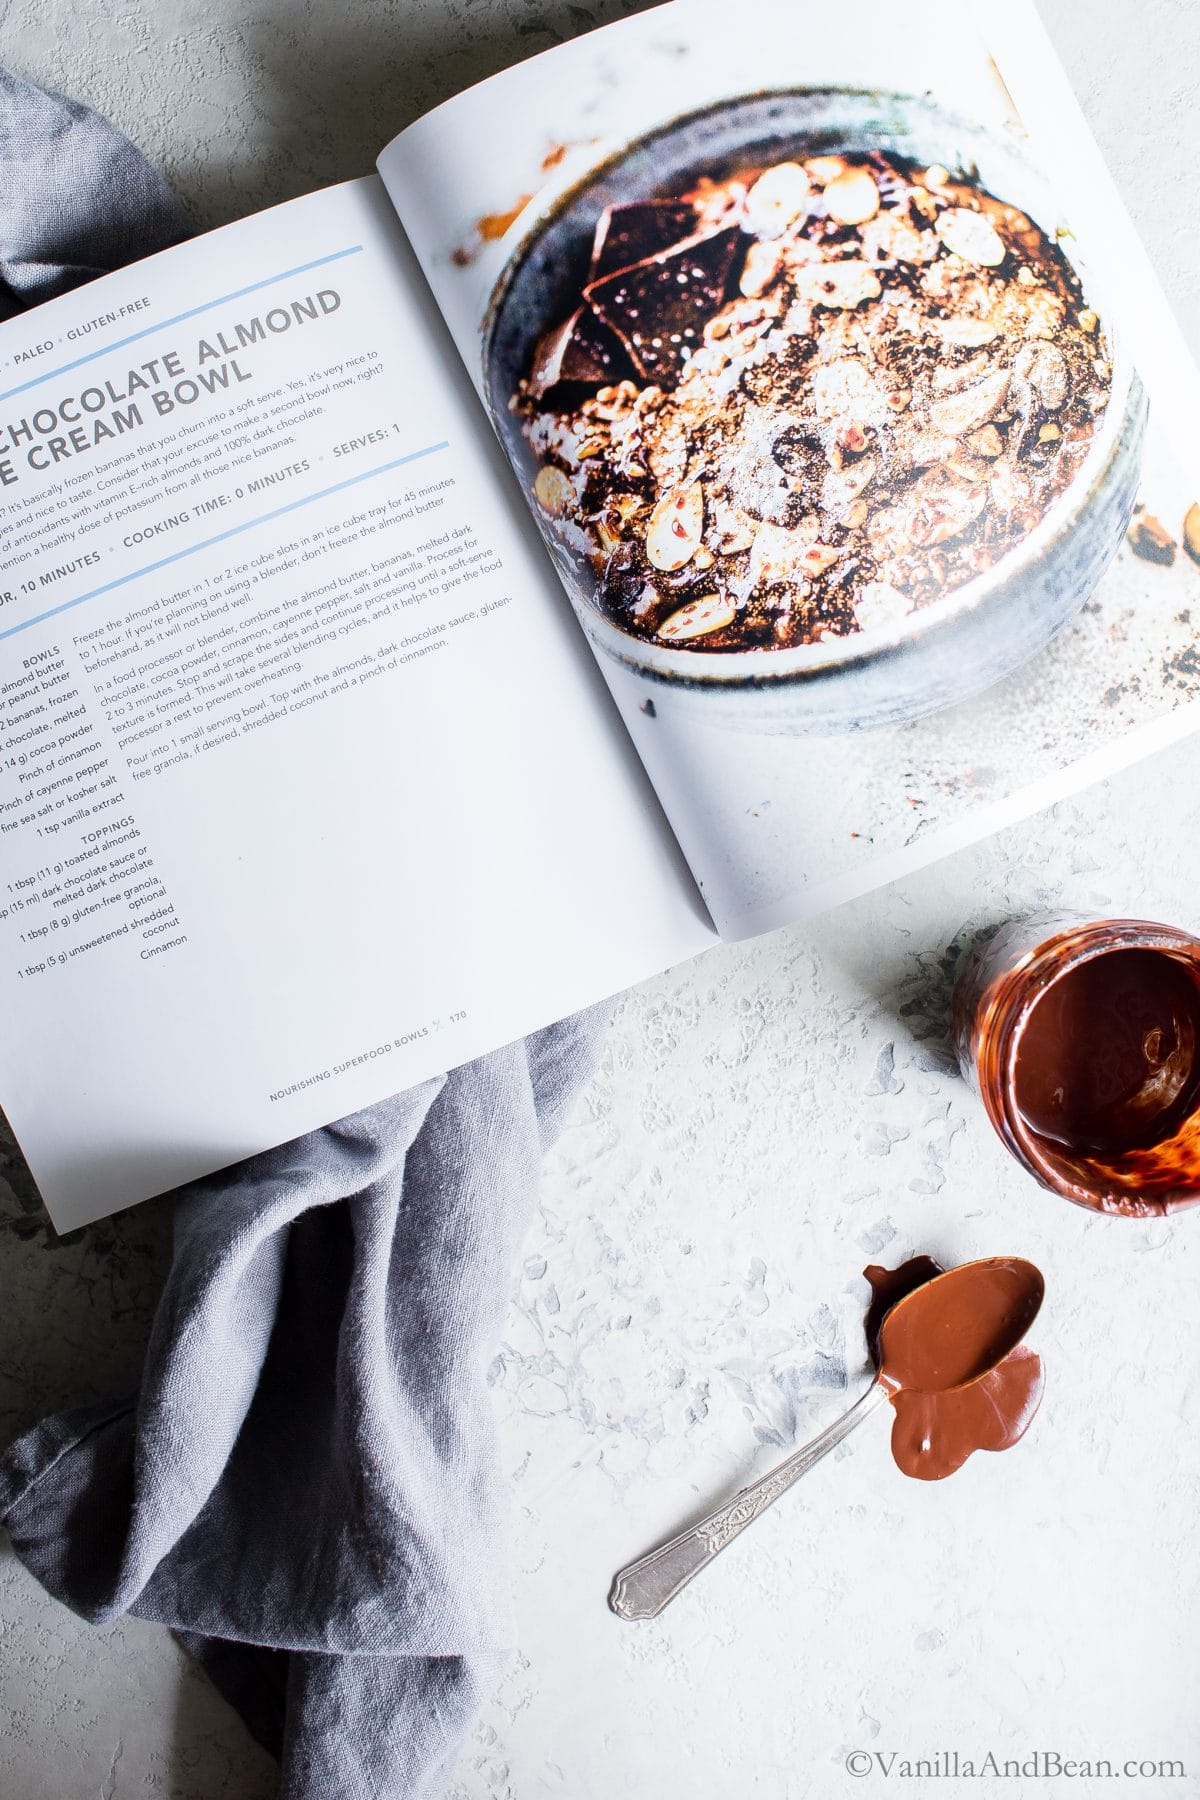 Picture of a recipe book with it open to Chocolate Almond Nice Cream Bowls.